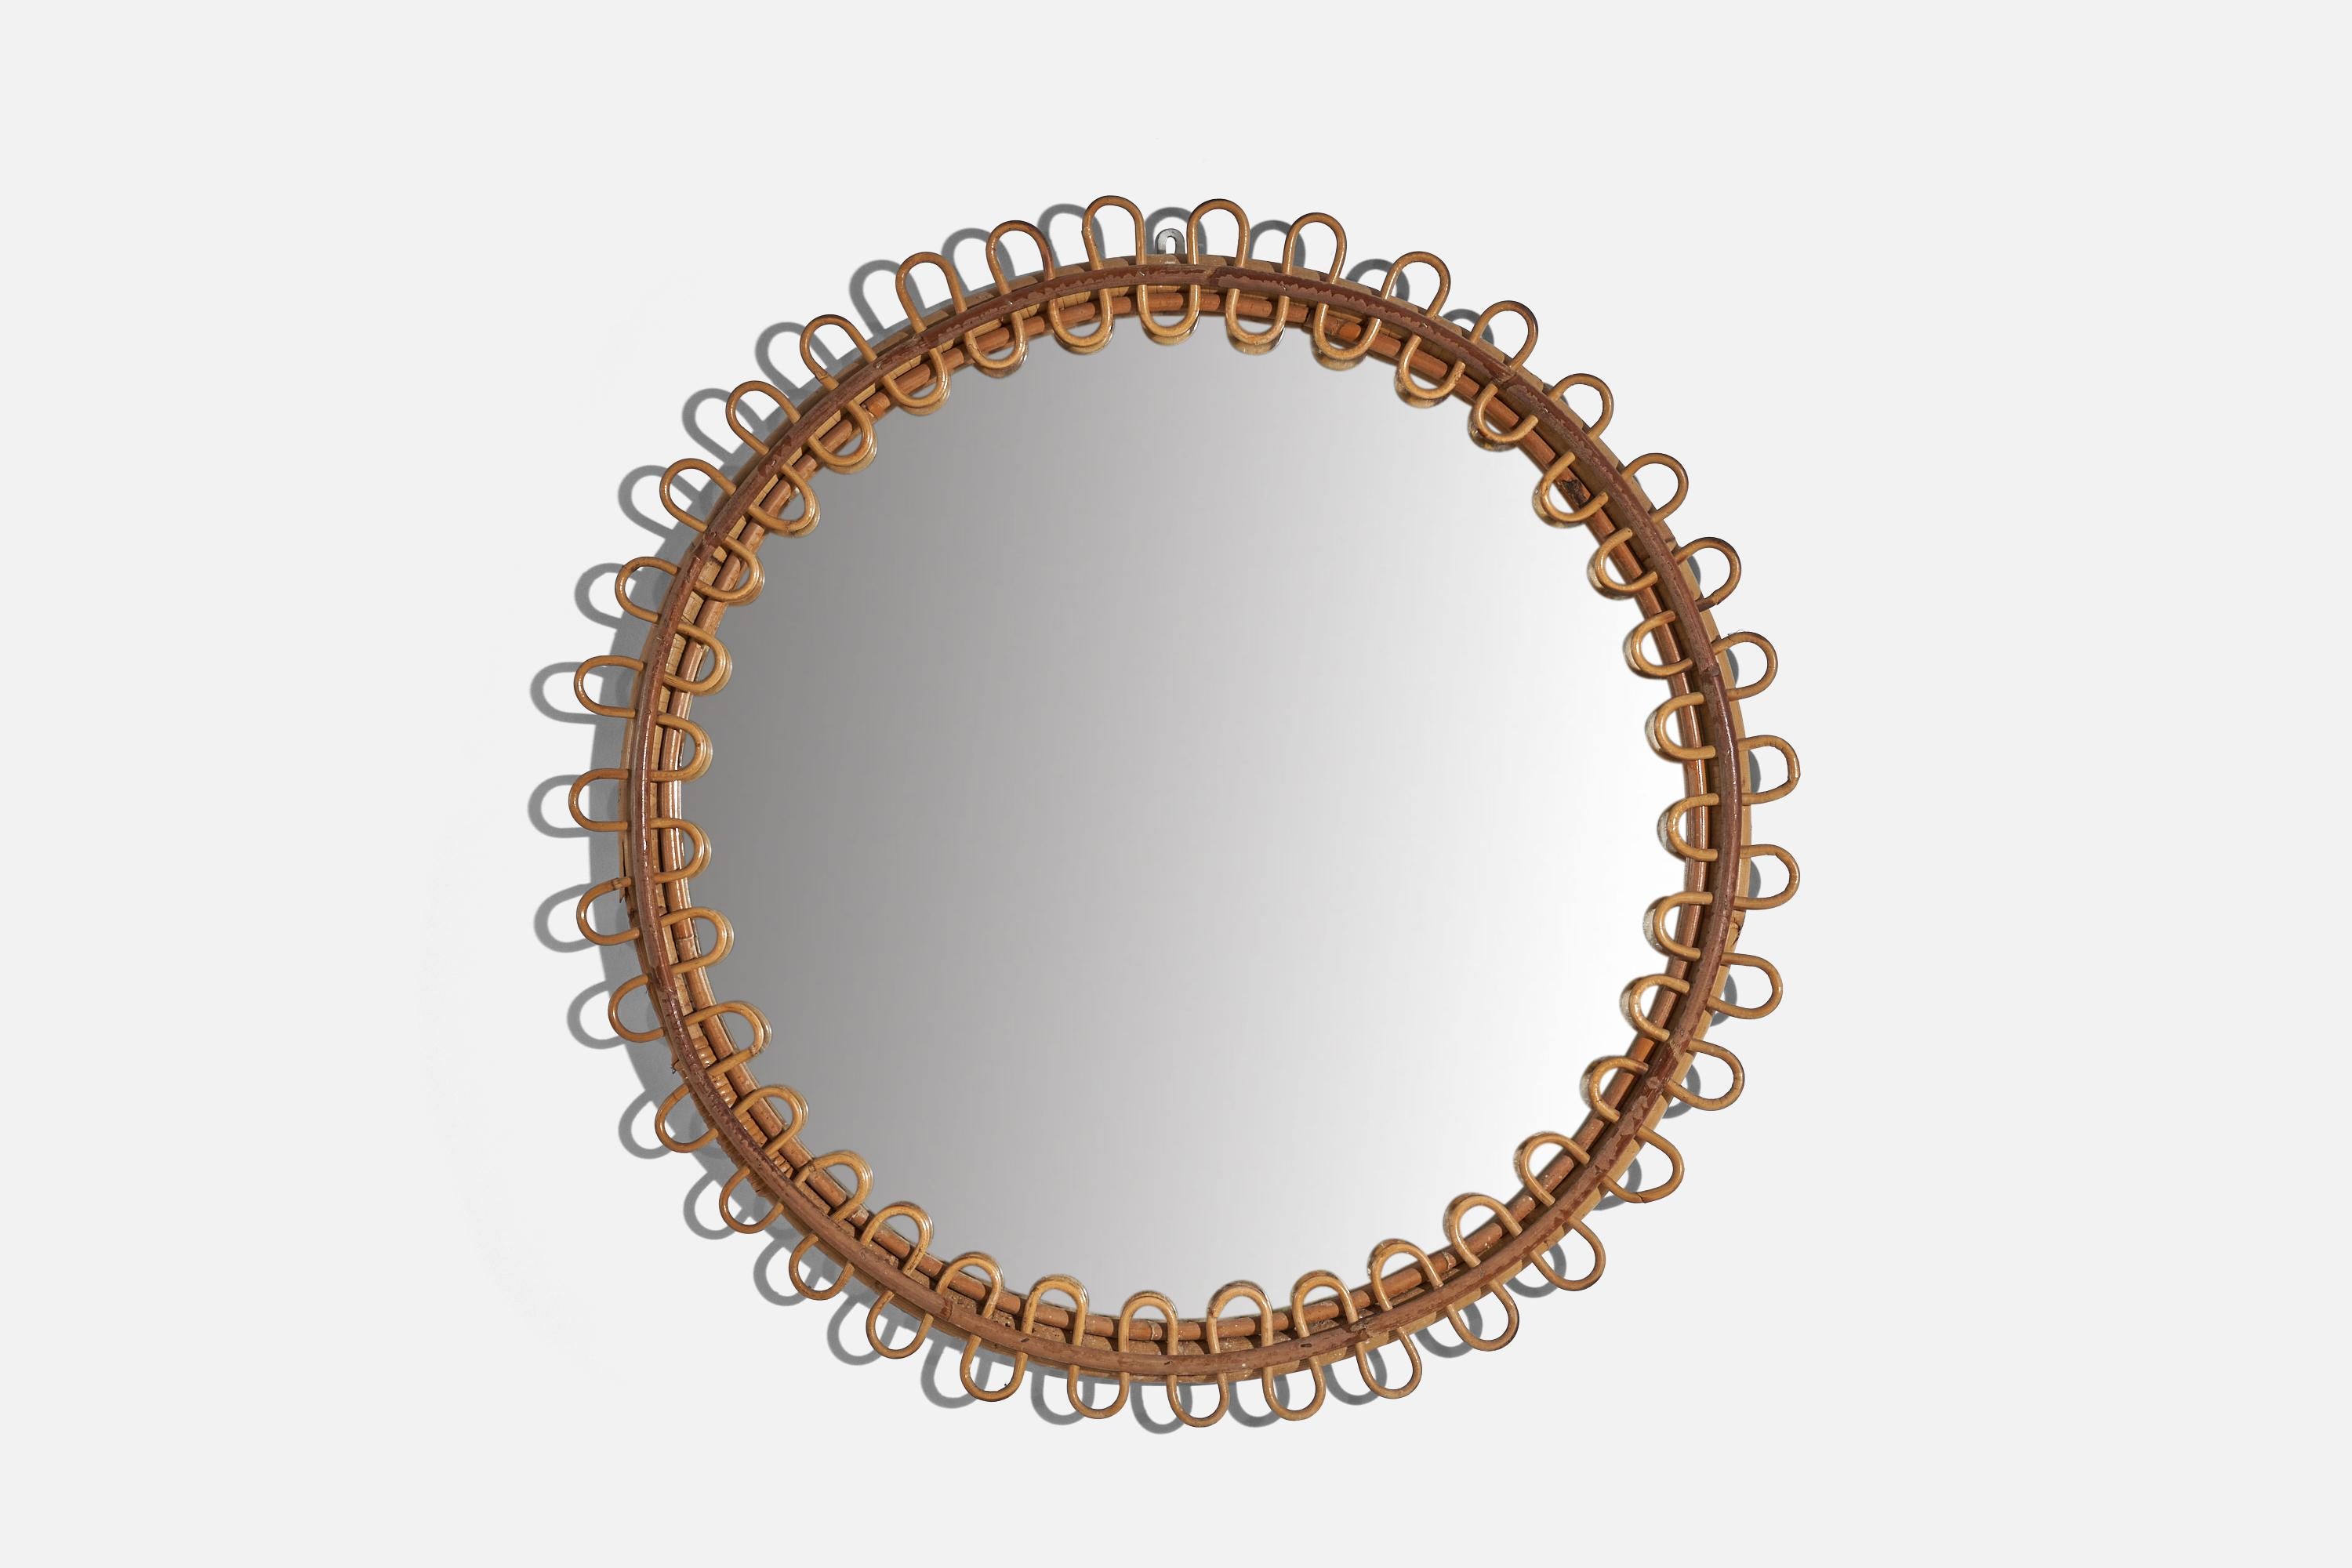 A circular, rattan wall mirror designed and produced by an Italian designer, Italy, 1950s-1960s.
 